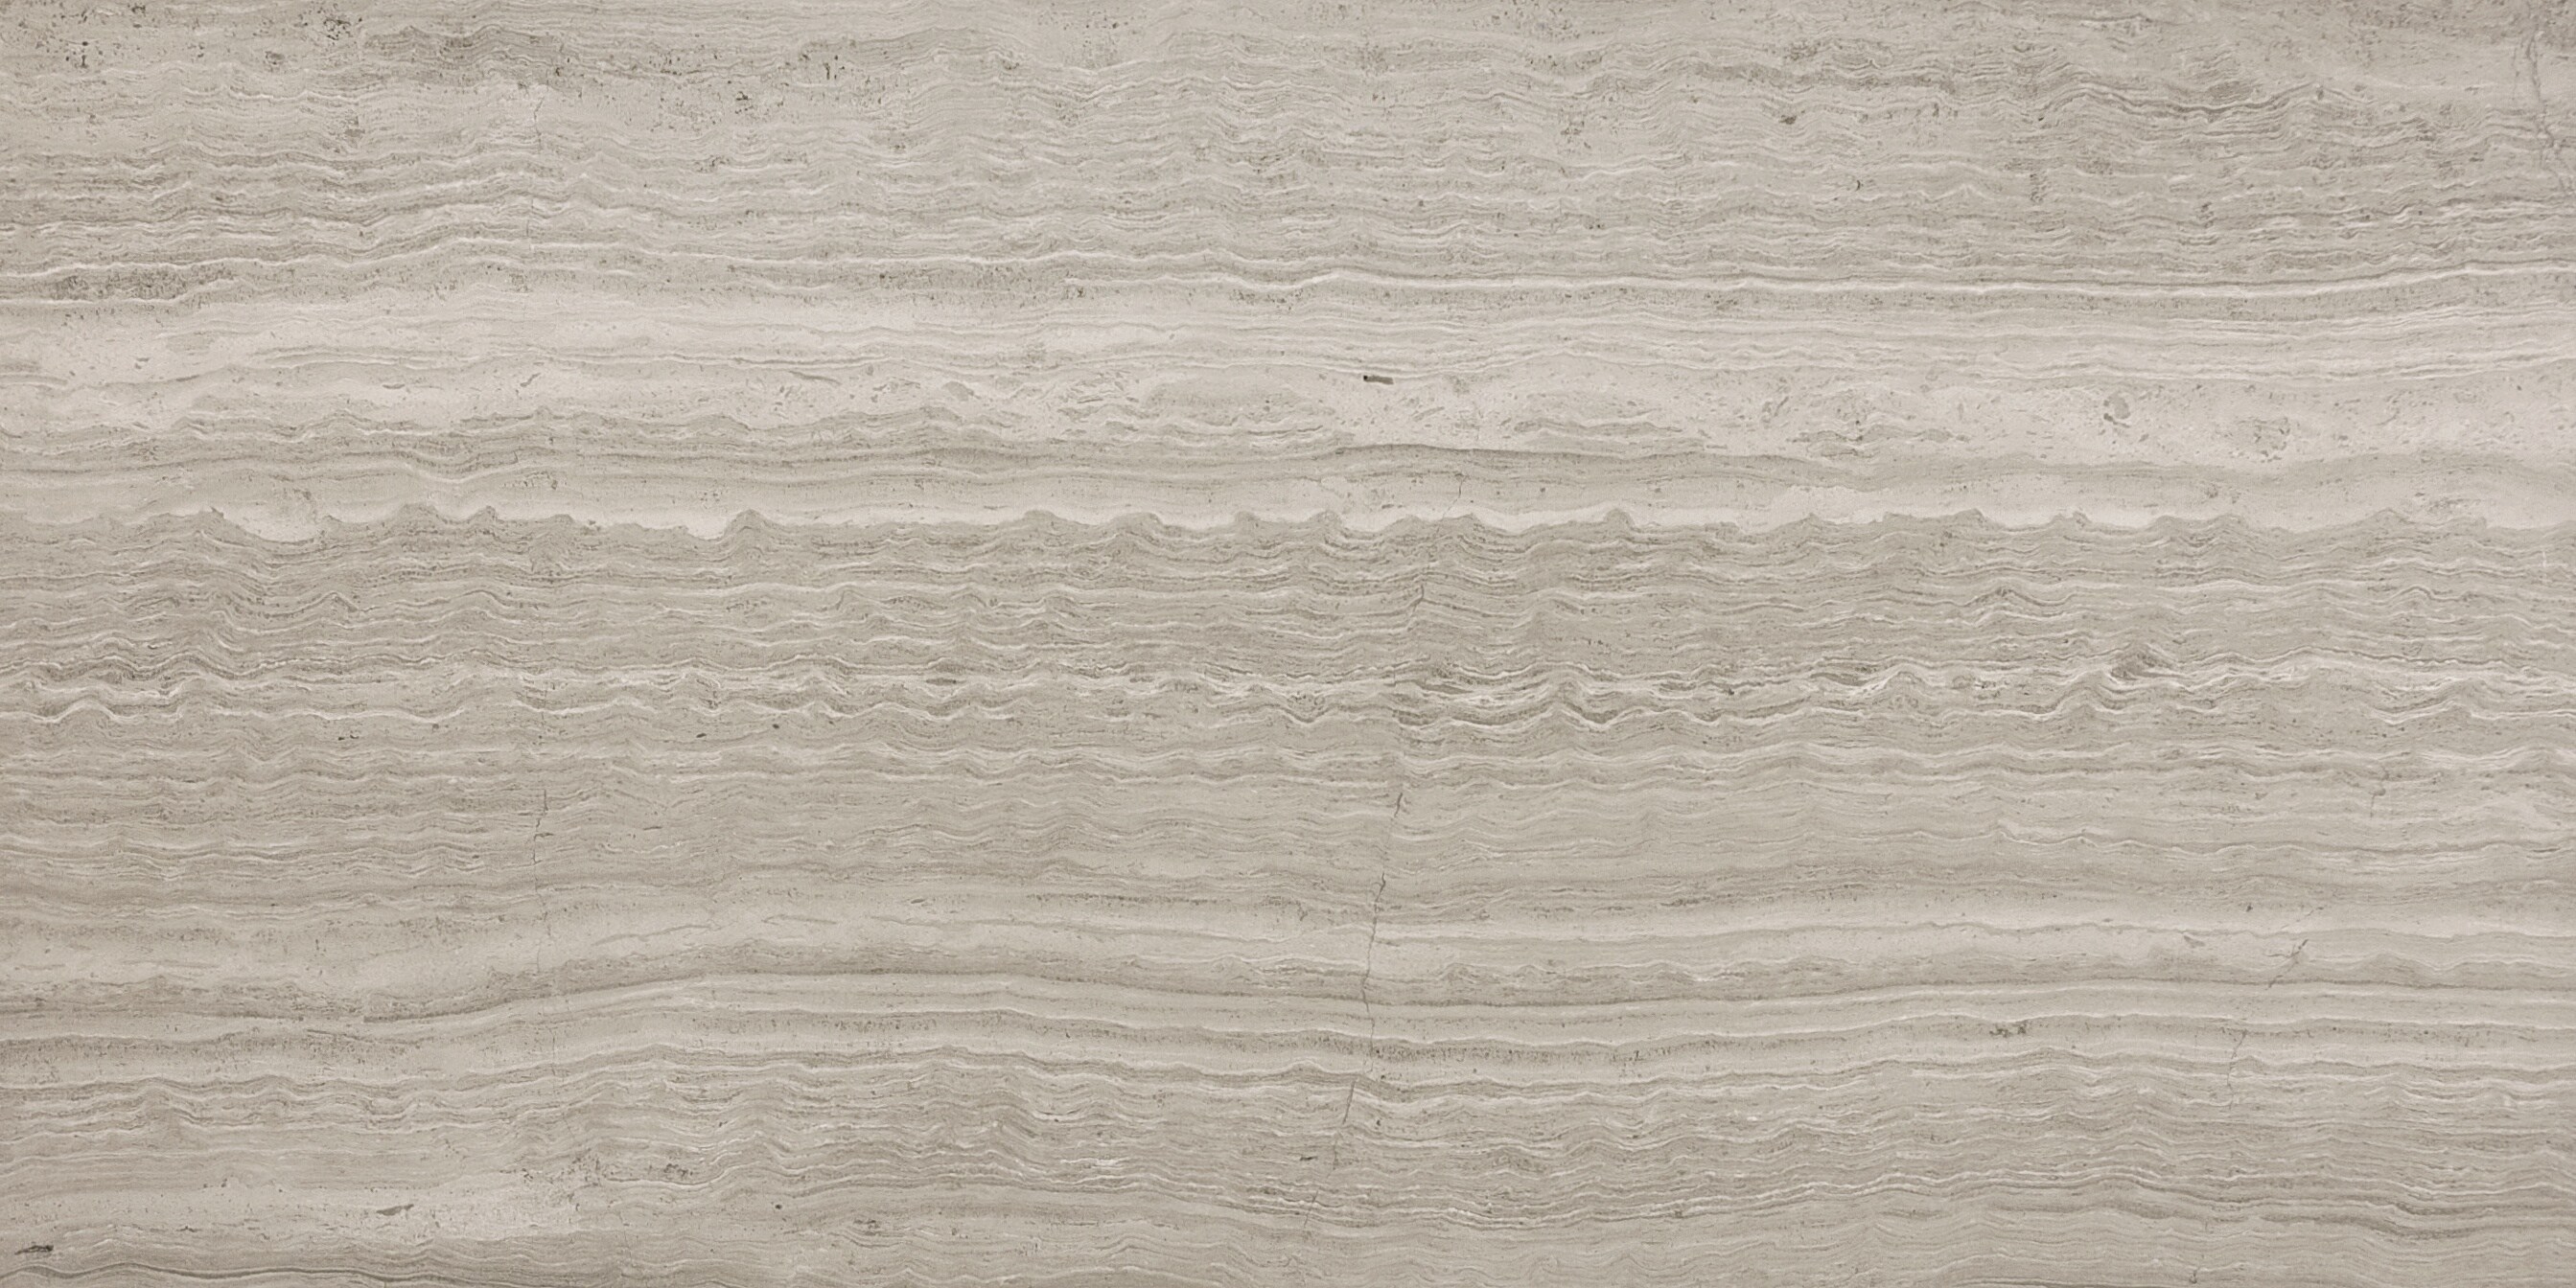 Anatolia Tile 4 Pack Strada Mist 12 In X 24 In Polished Natural Stone Marble Look Tile At